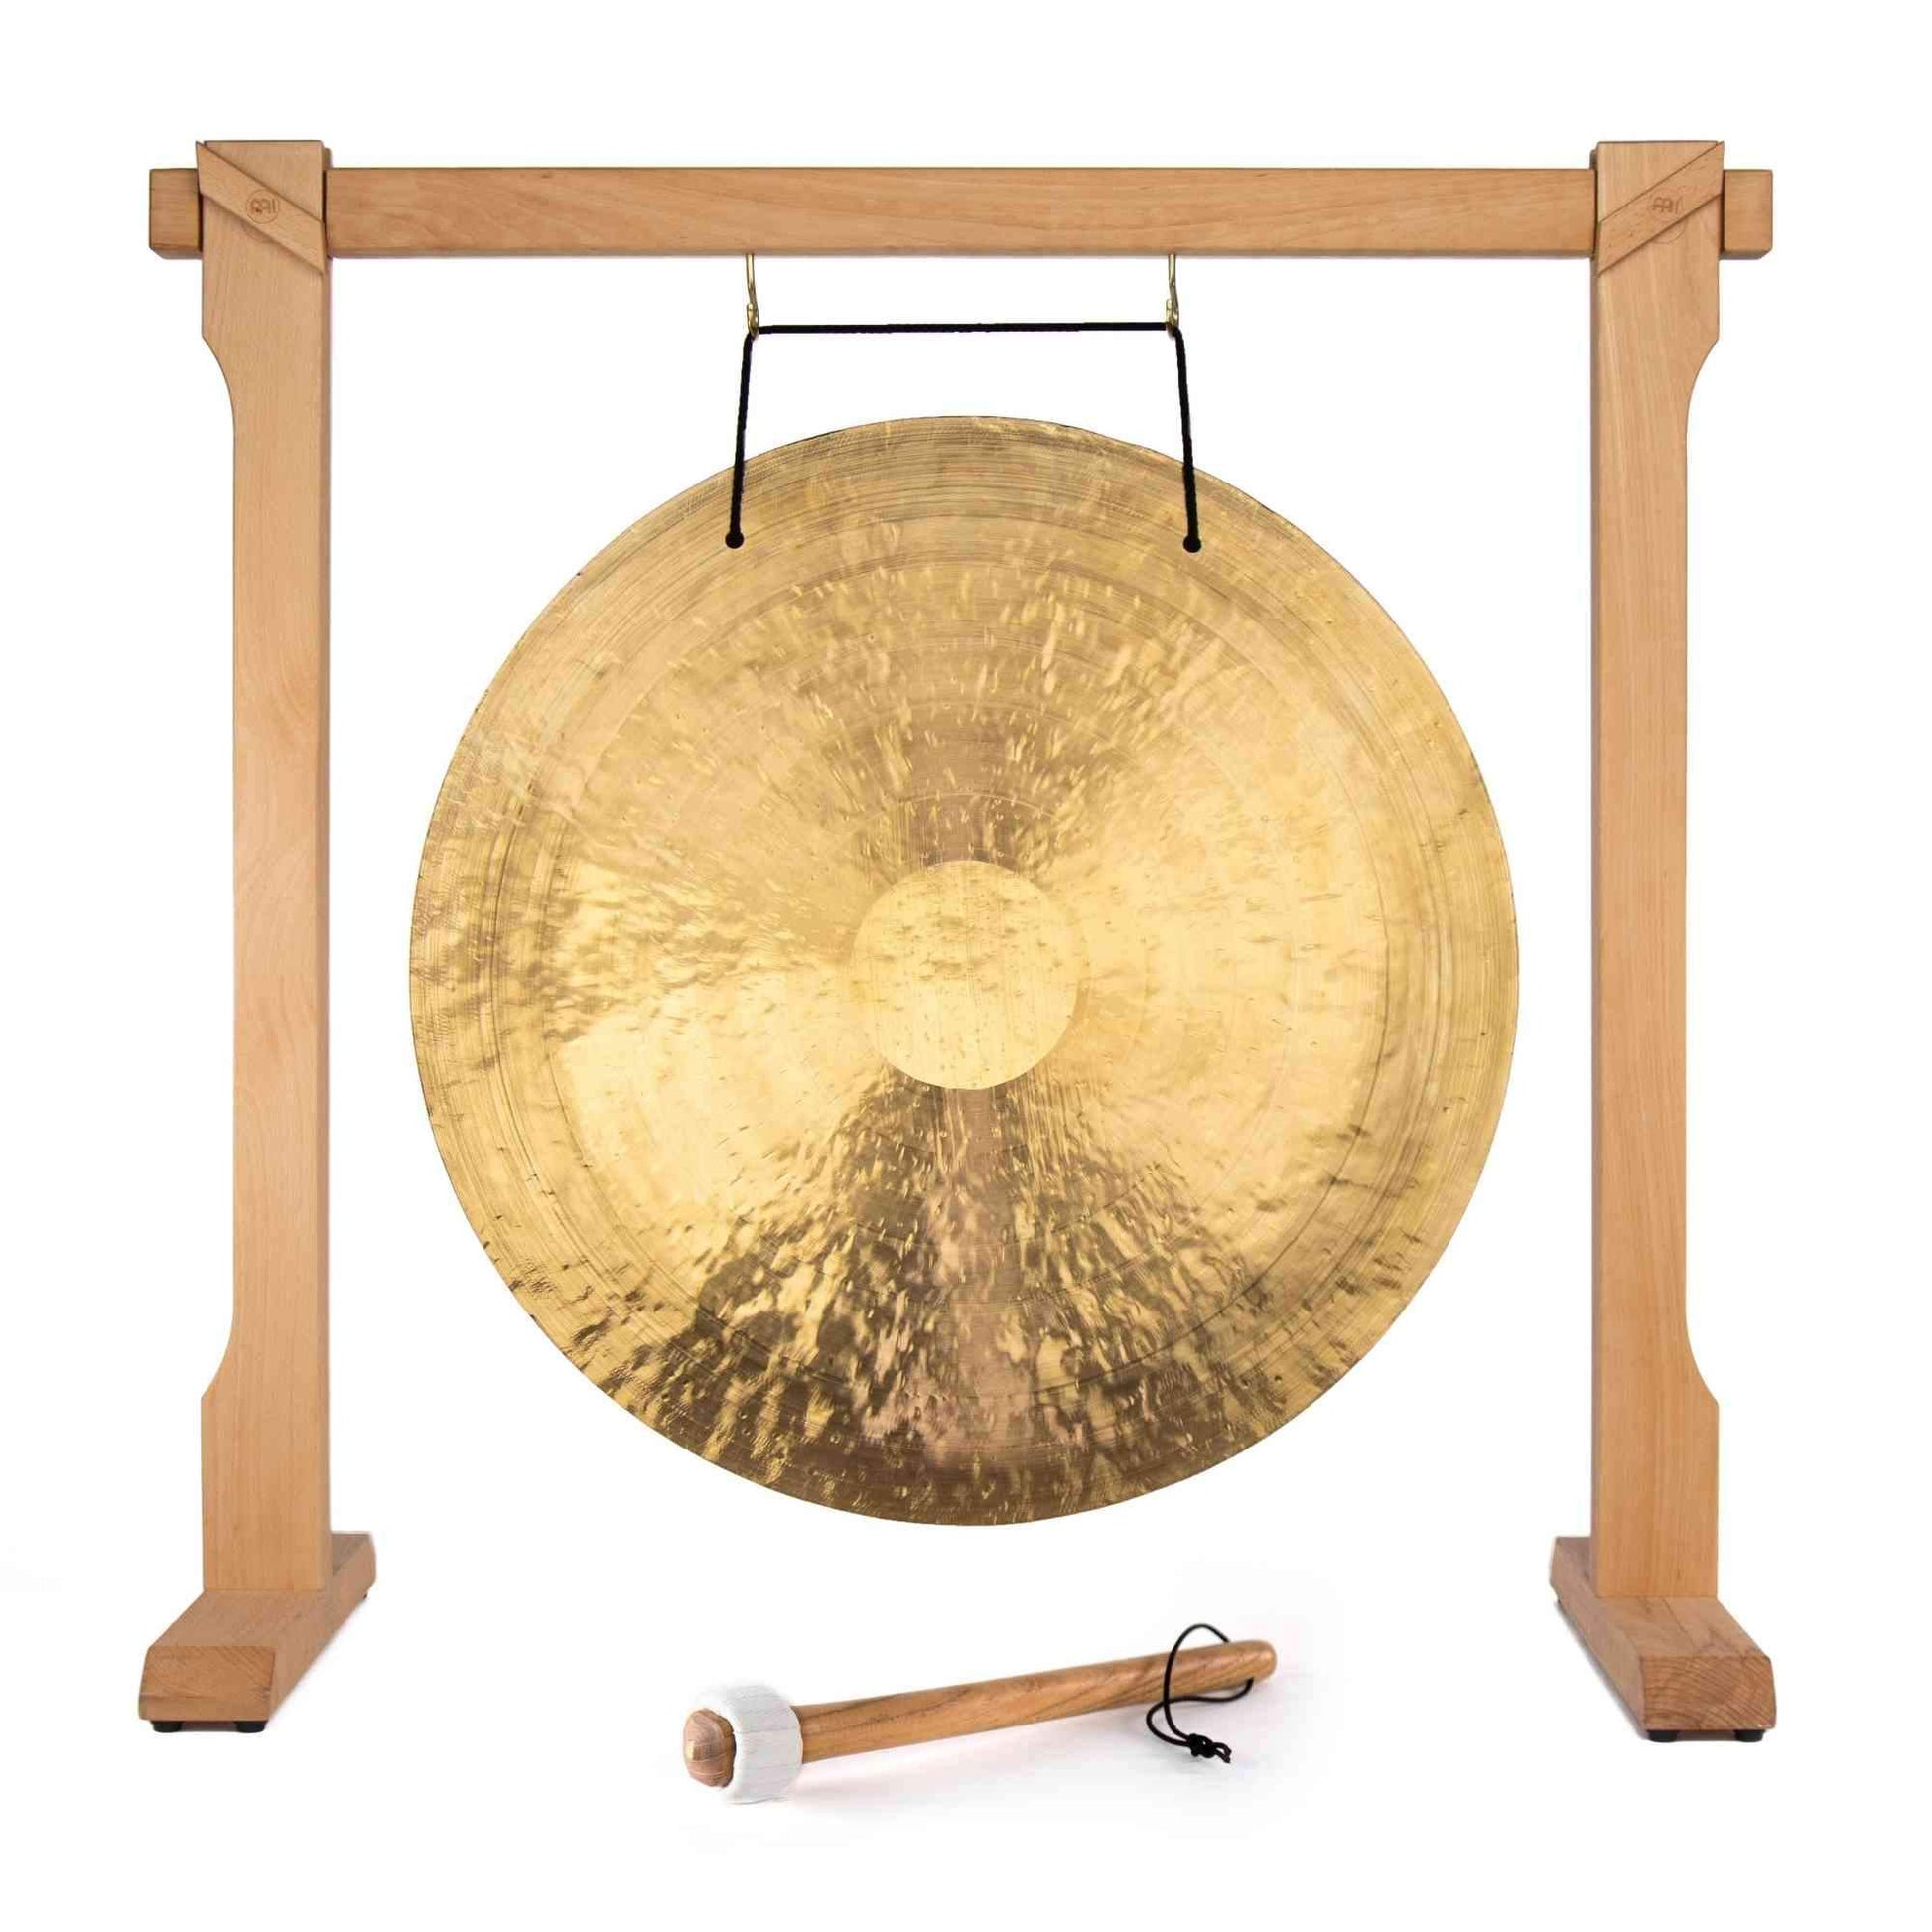 The Gong Shop Chinese Gongs with Stands 28" Chinese Wind Gong on Meinl Wooden Gong Stand with Mallet